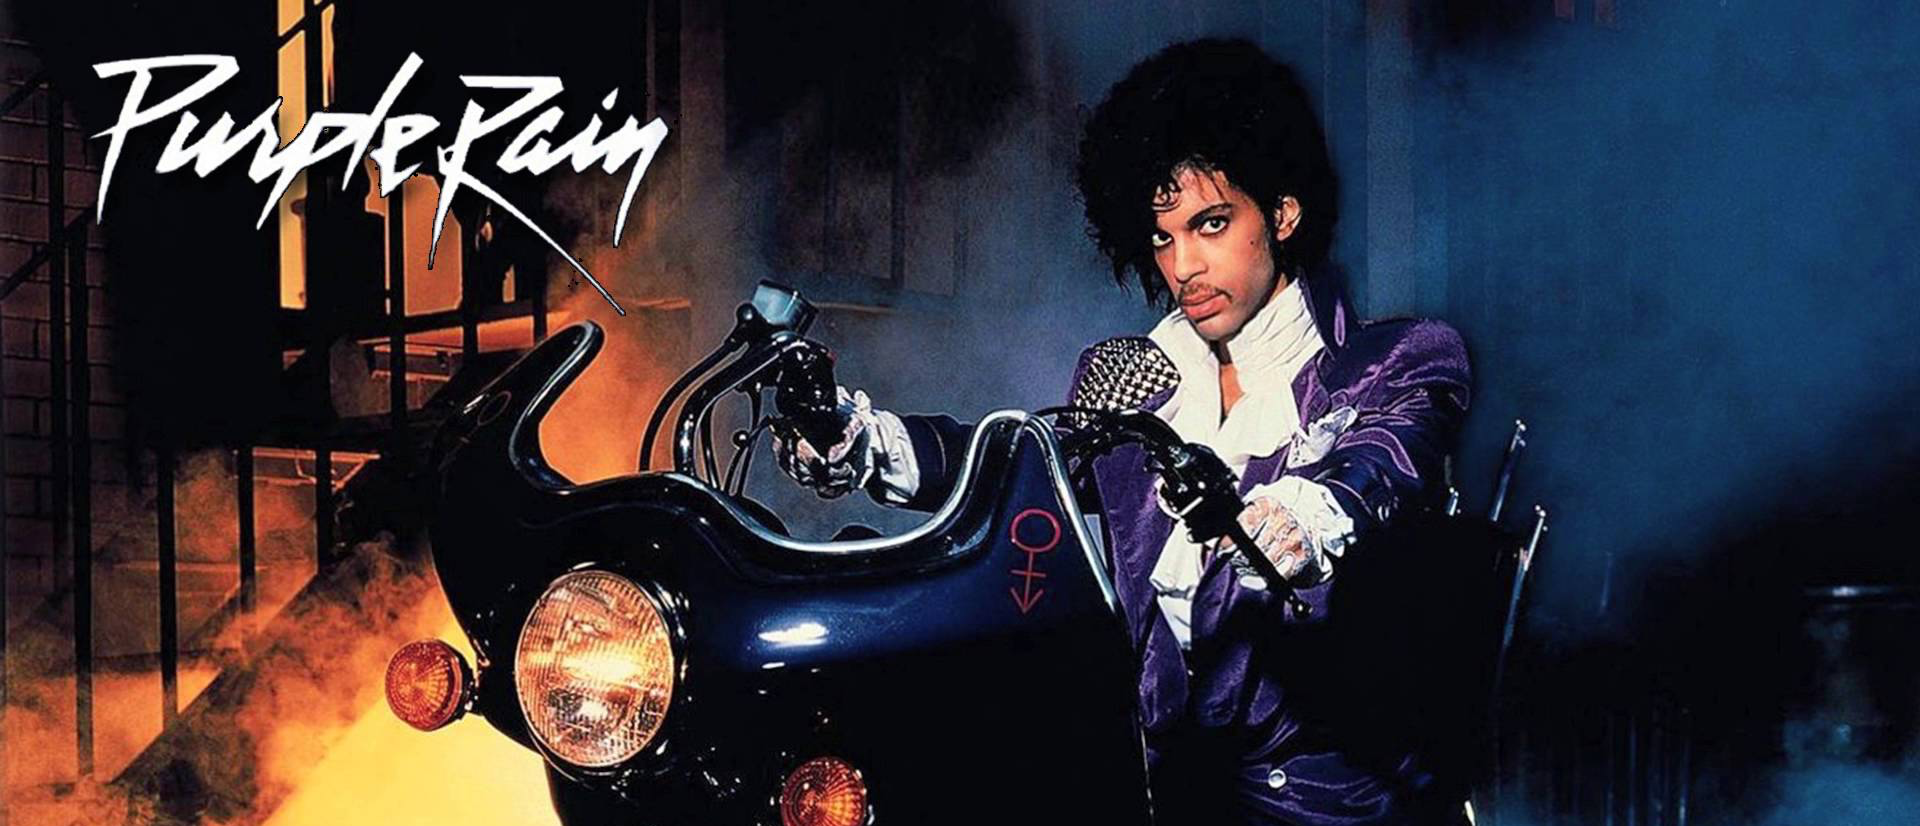 A beginner's guide to Prince